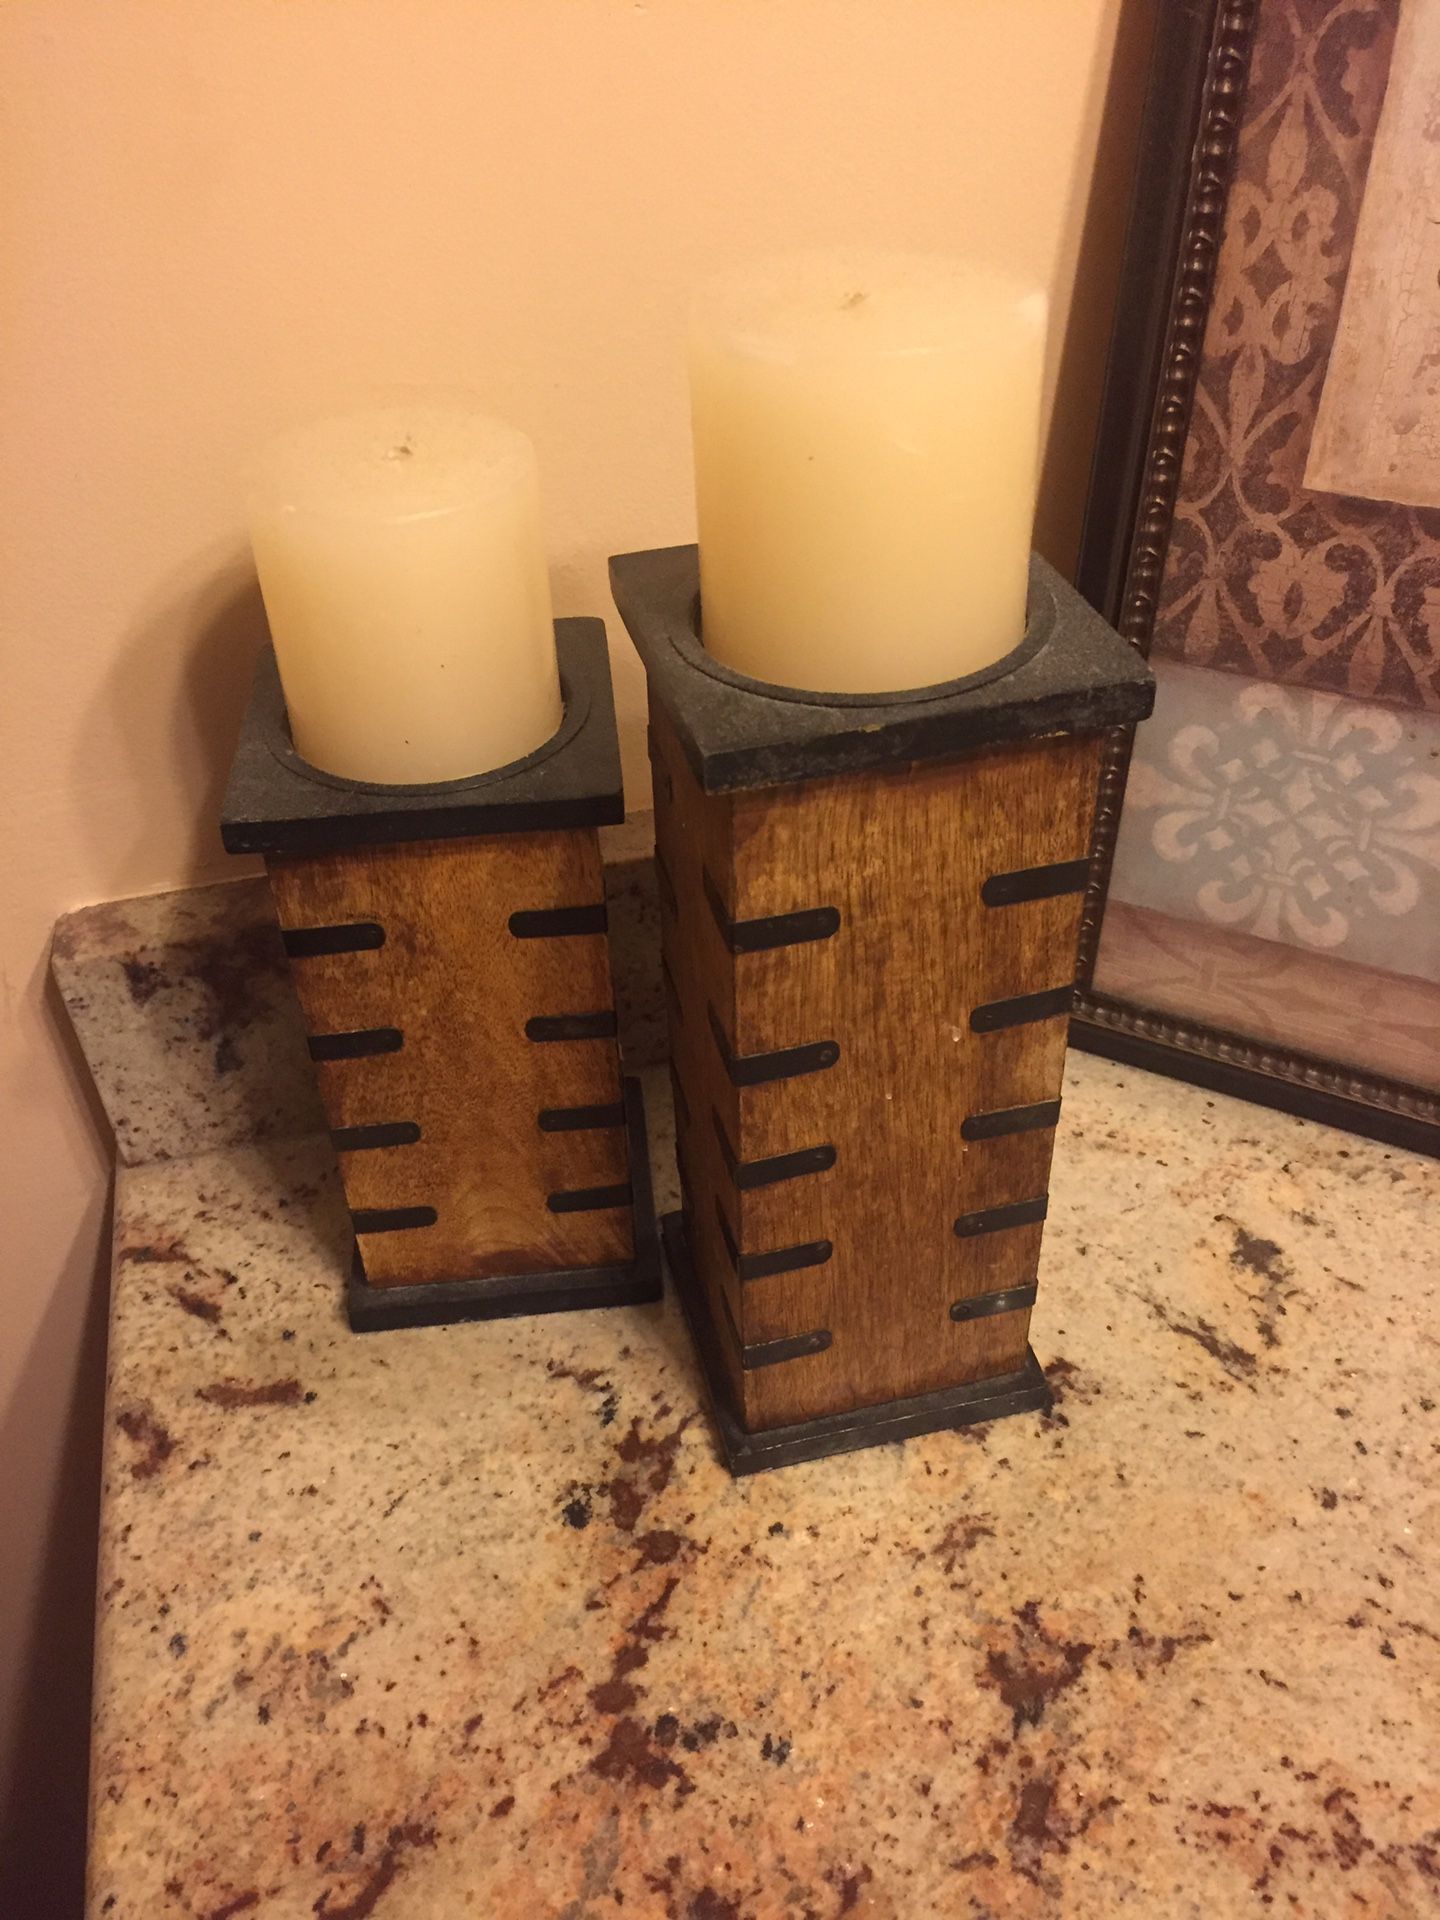 2 Candles with Decorative stand